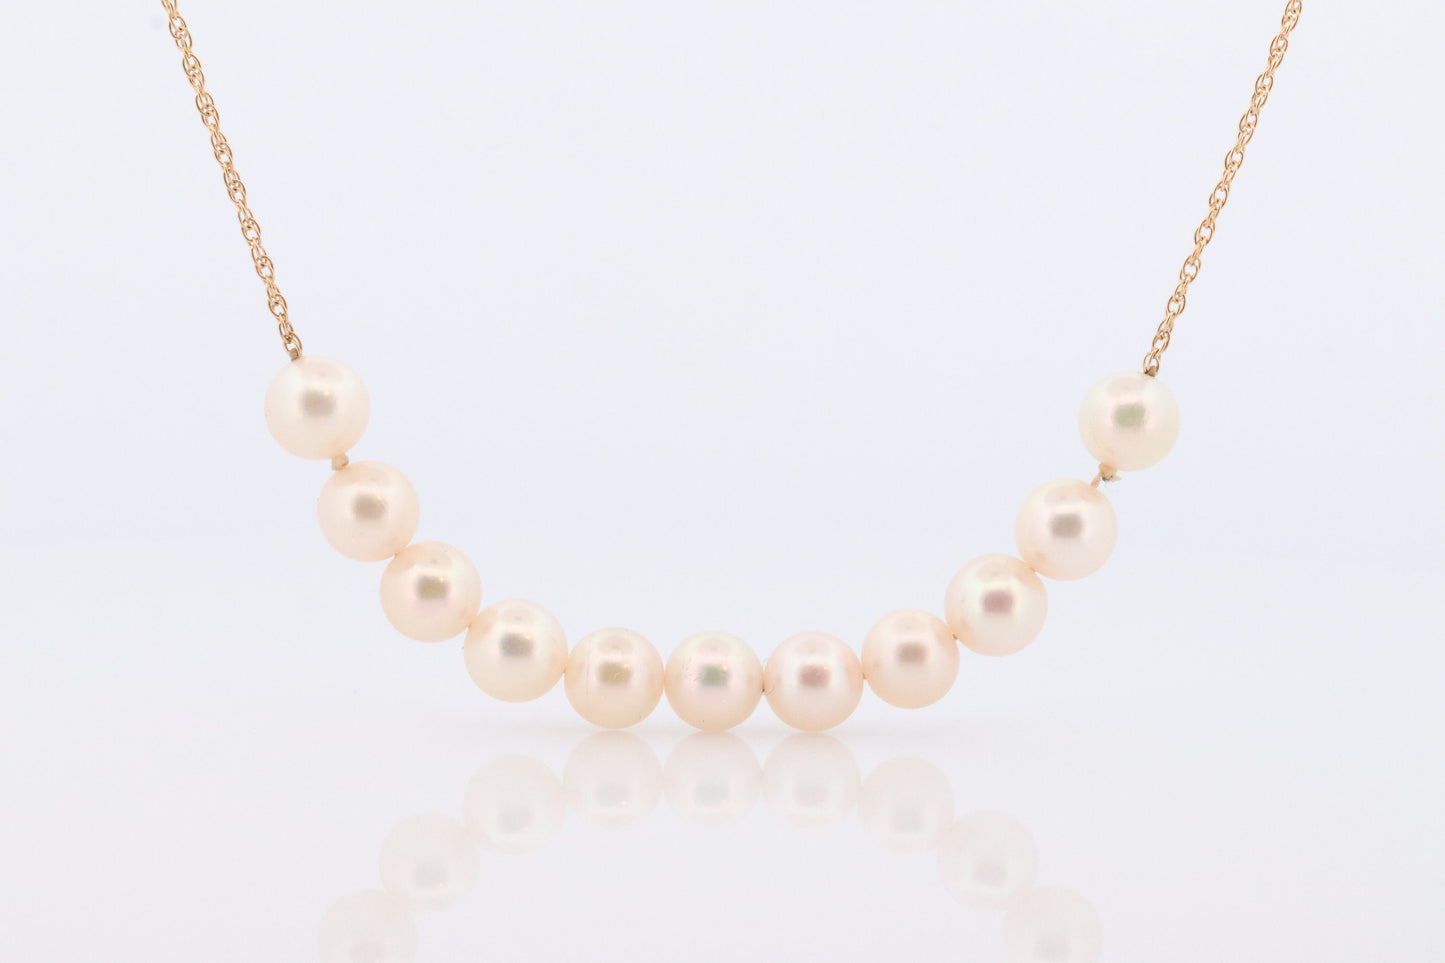 14k Akoya Pearl Necklace. Long Station Pearl Chain Necklace. 27in length 7mm AKOYA pearls. Layering Necklace. st(42)